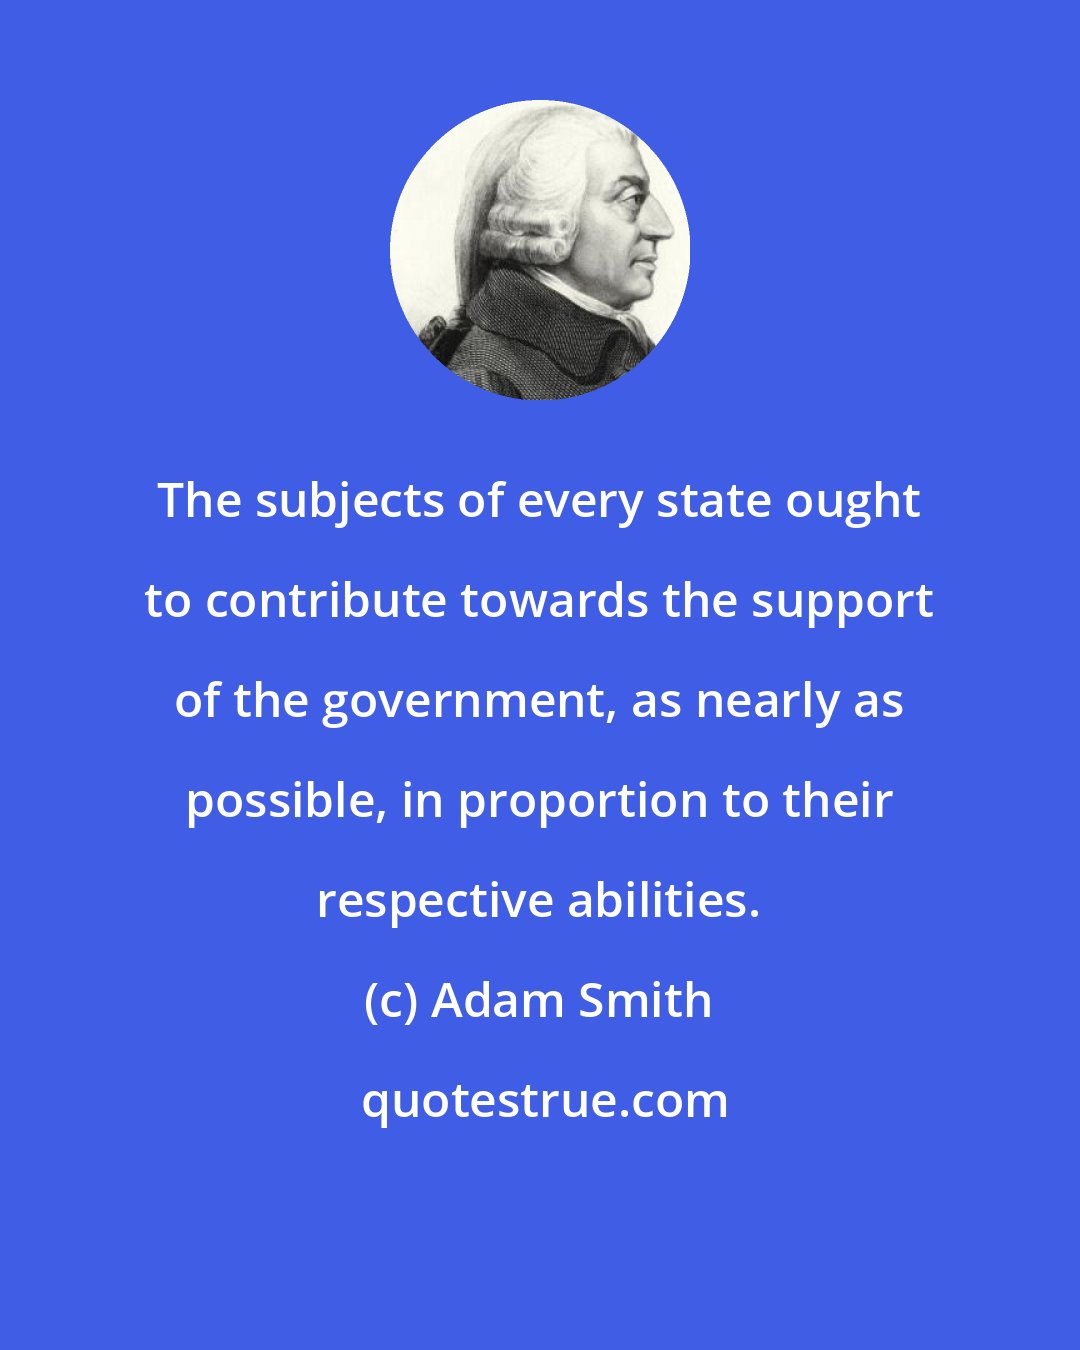 Adam Smith: The subjects of every state ought to contribute towards the support of the government, as nearly as possible, in proportion to their respective abilities.